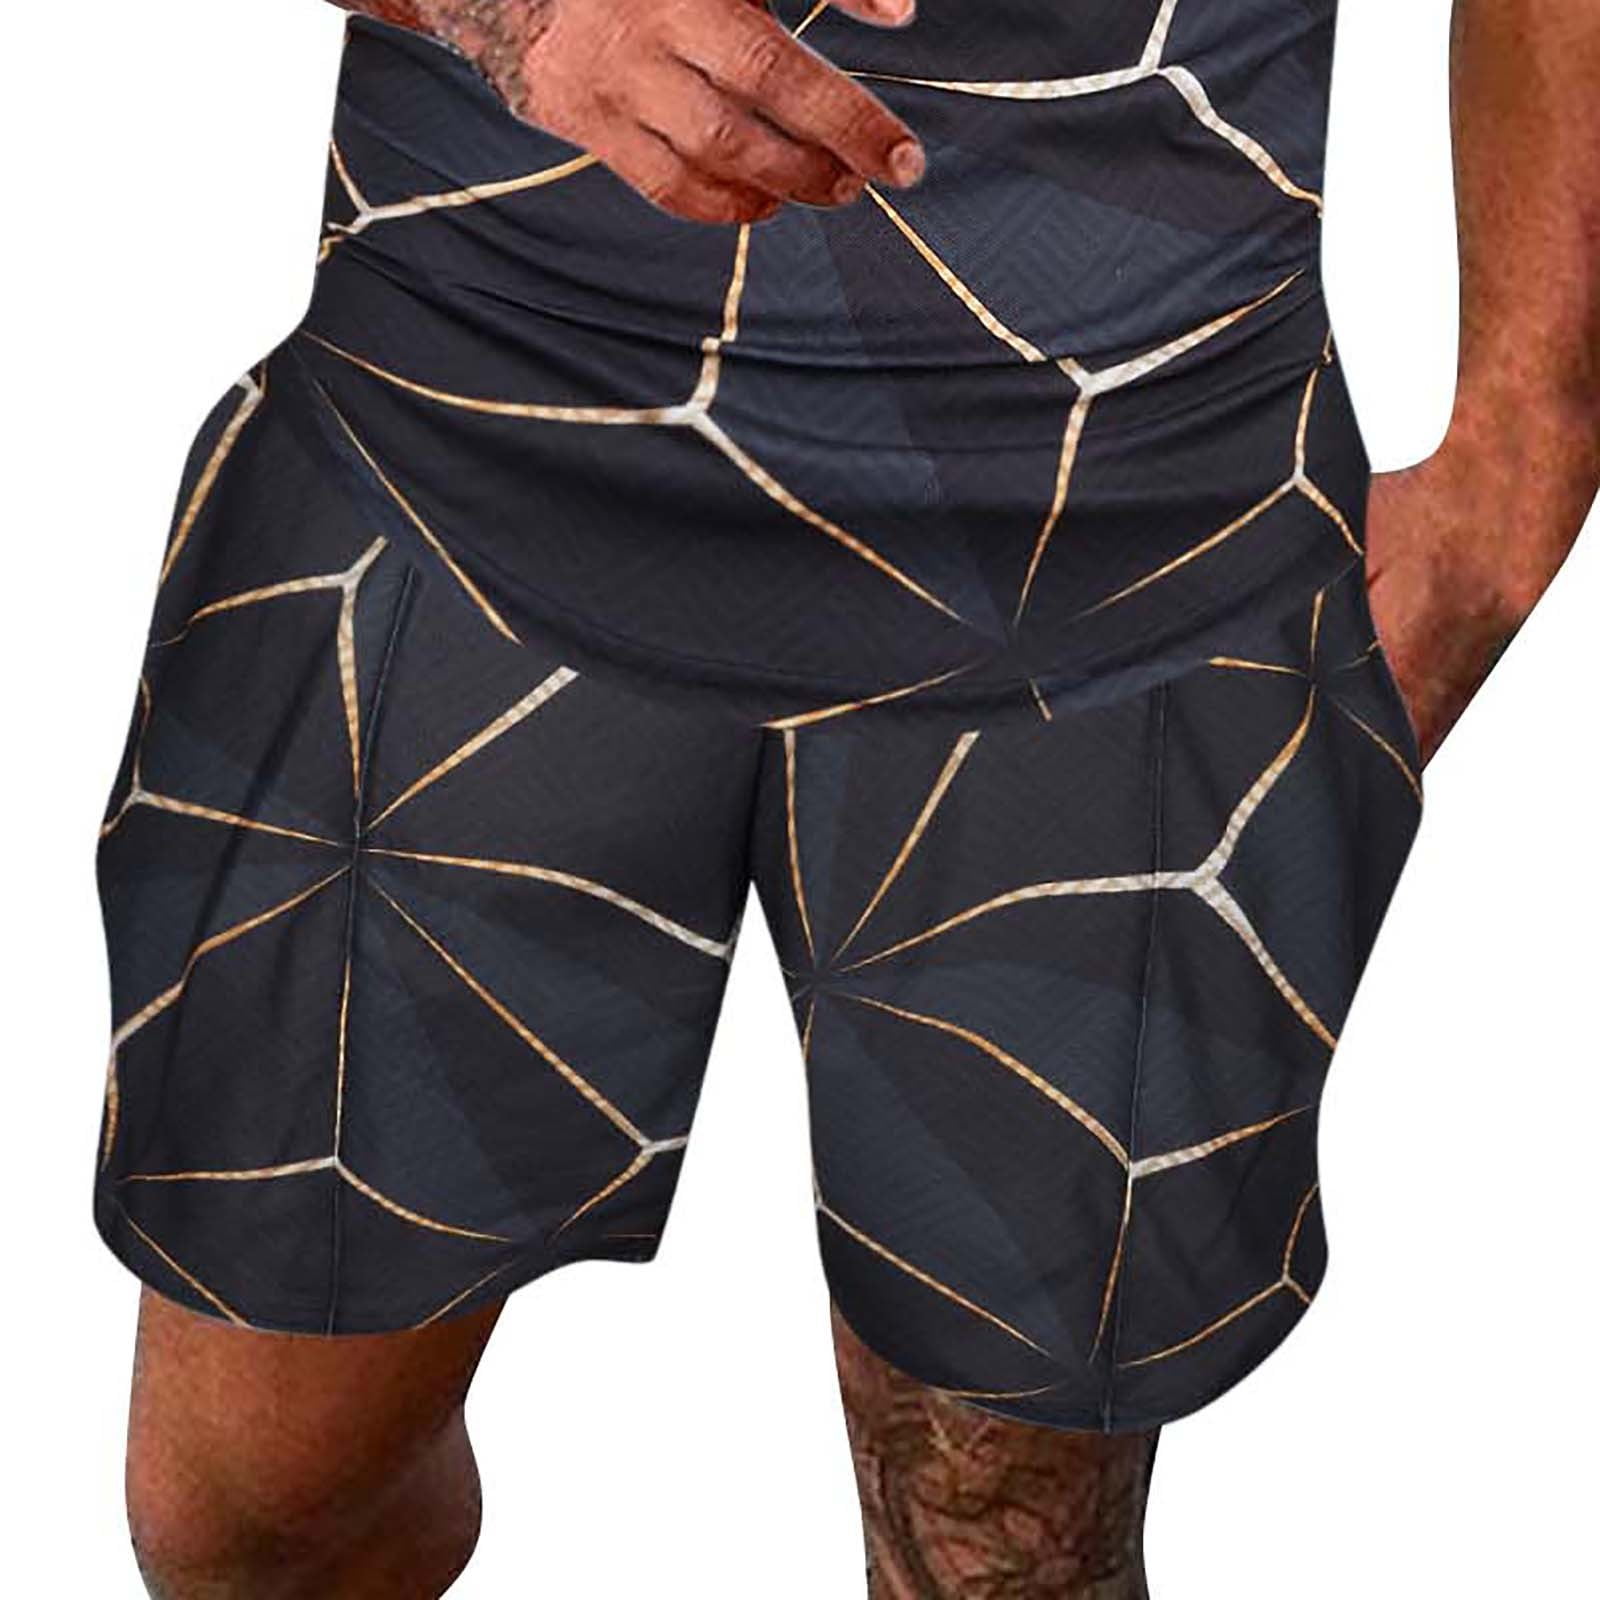 Pedort Shorts For Men Casual Summer Plus Size Mens Shorts Causal Camo ...